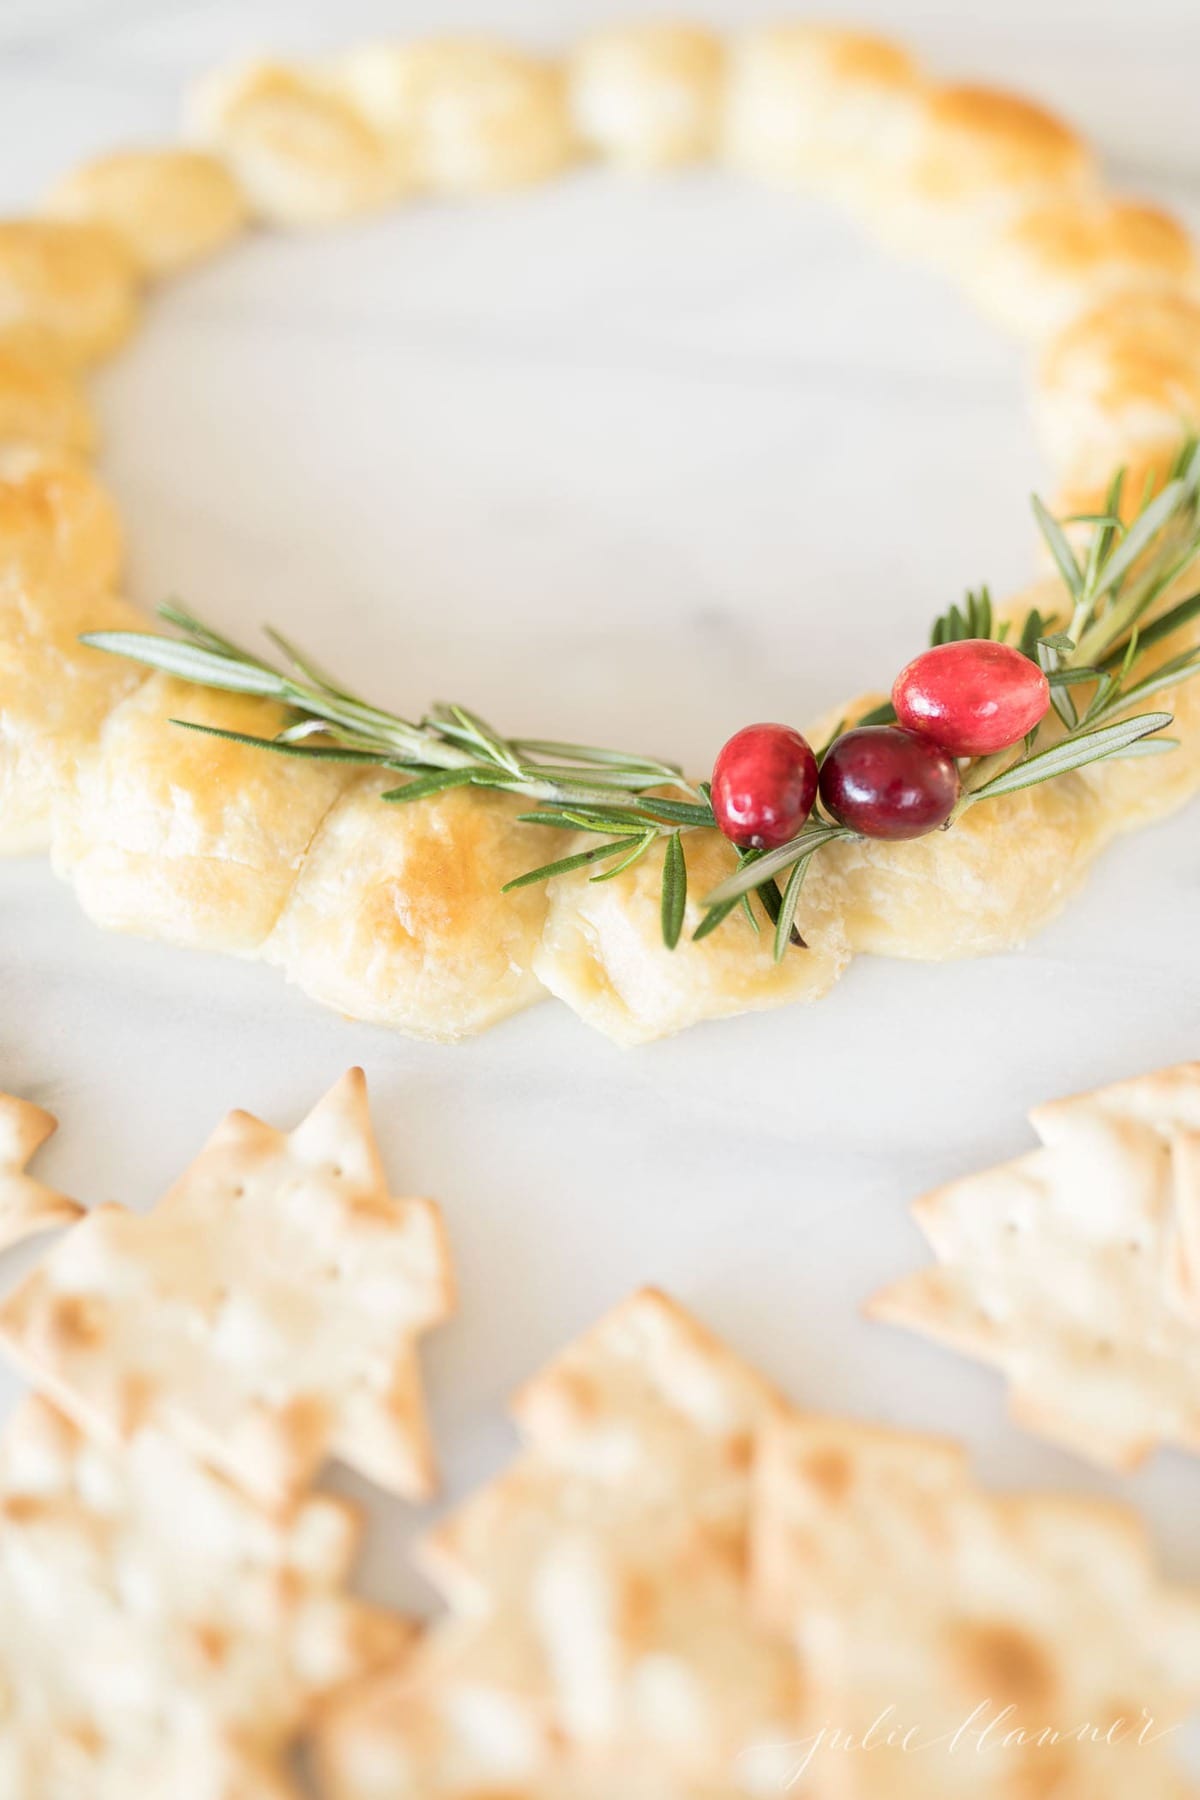 baked brie wreath with decorations